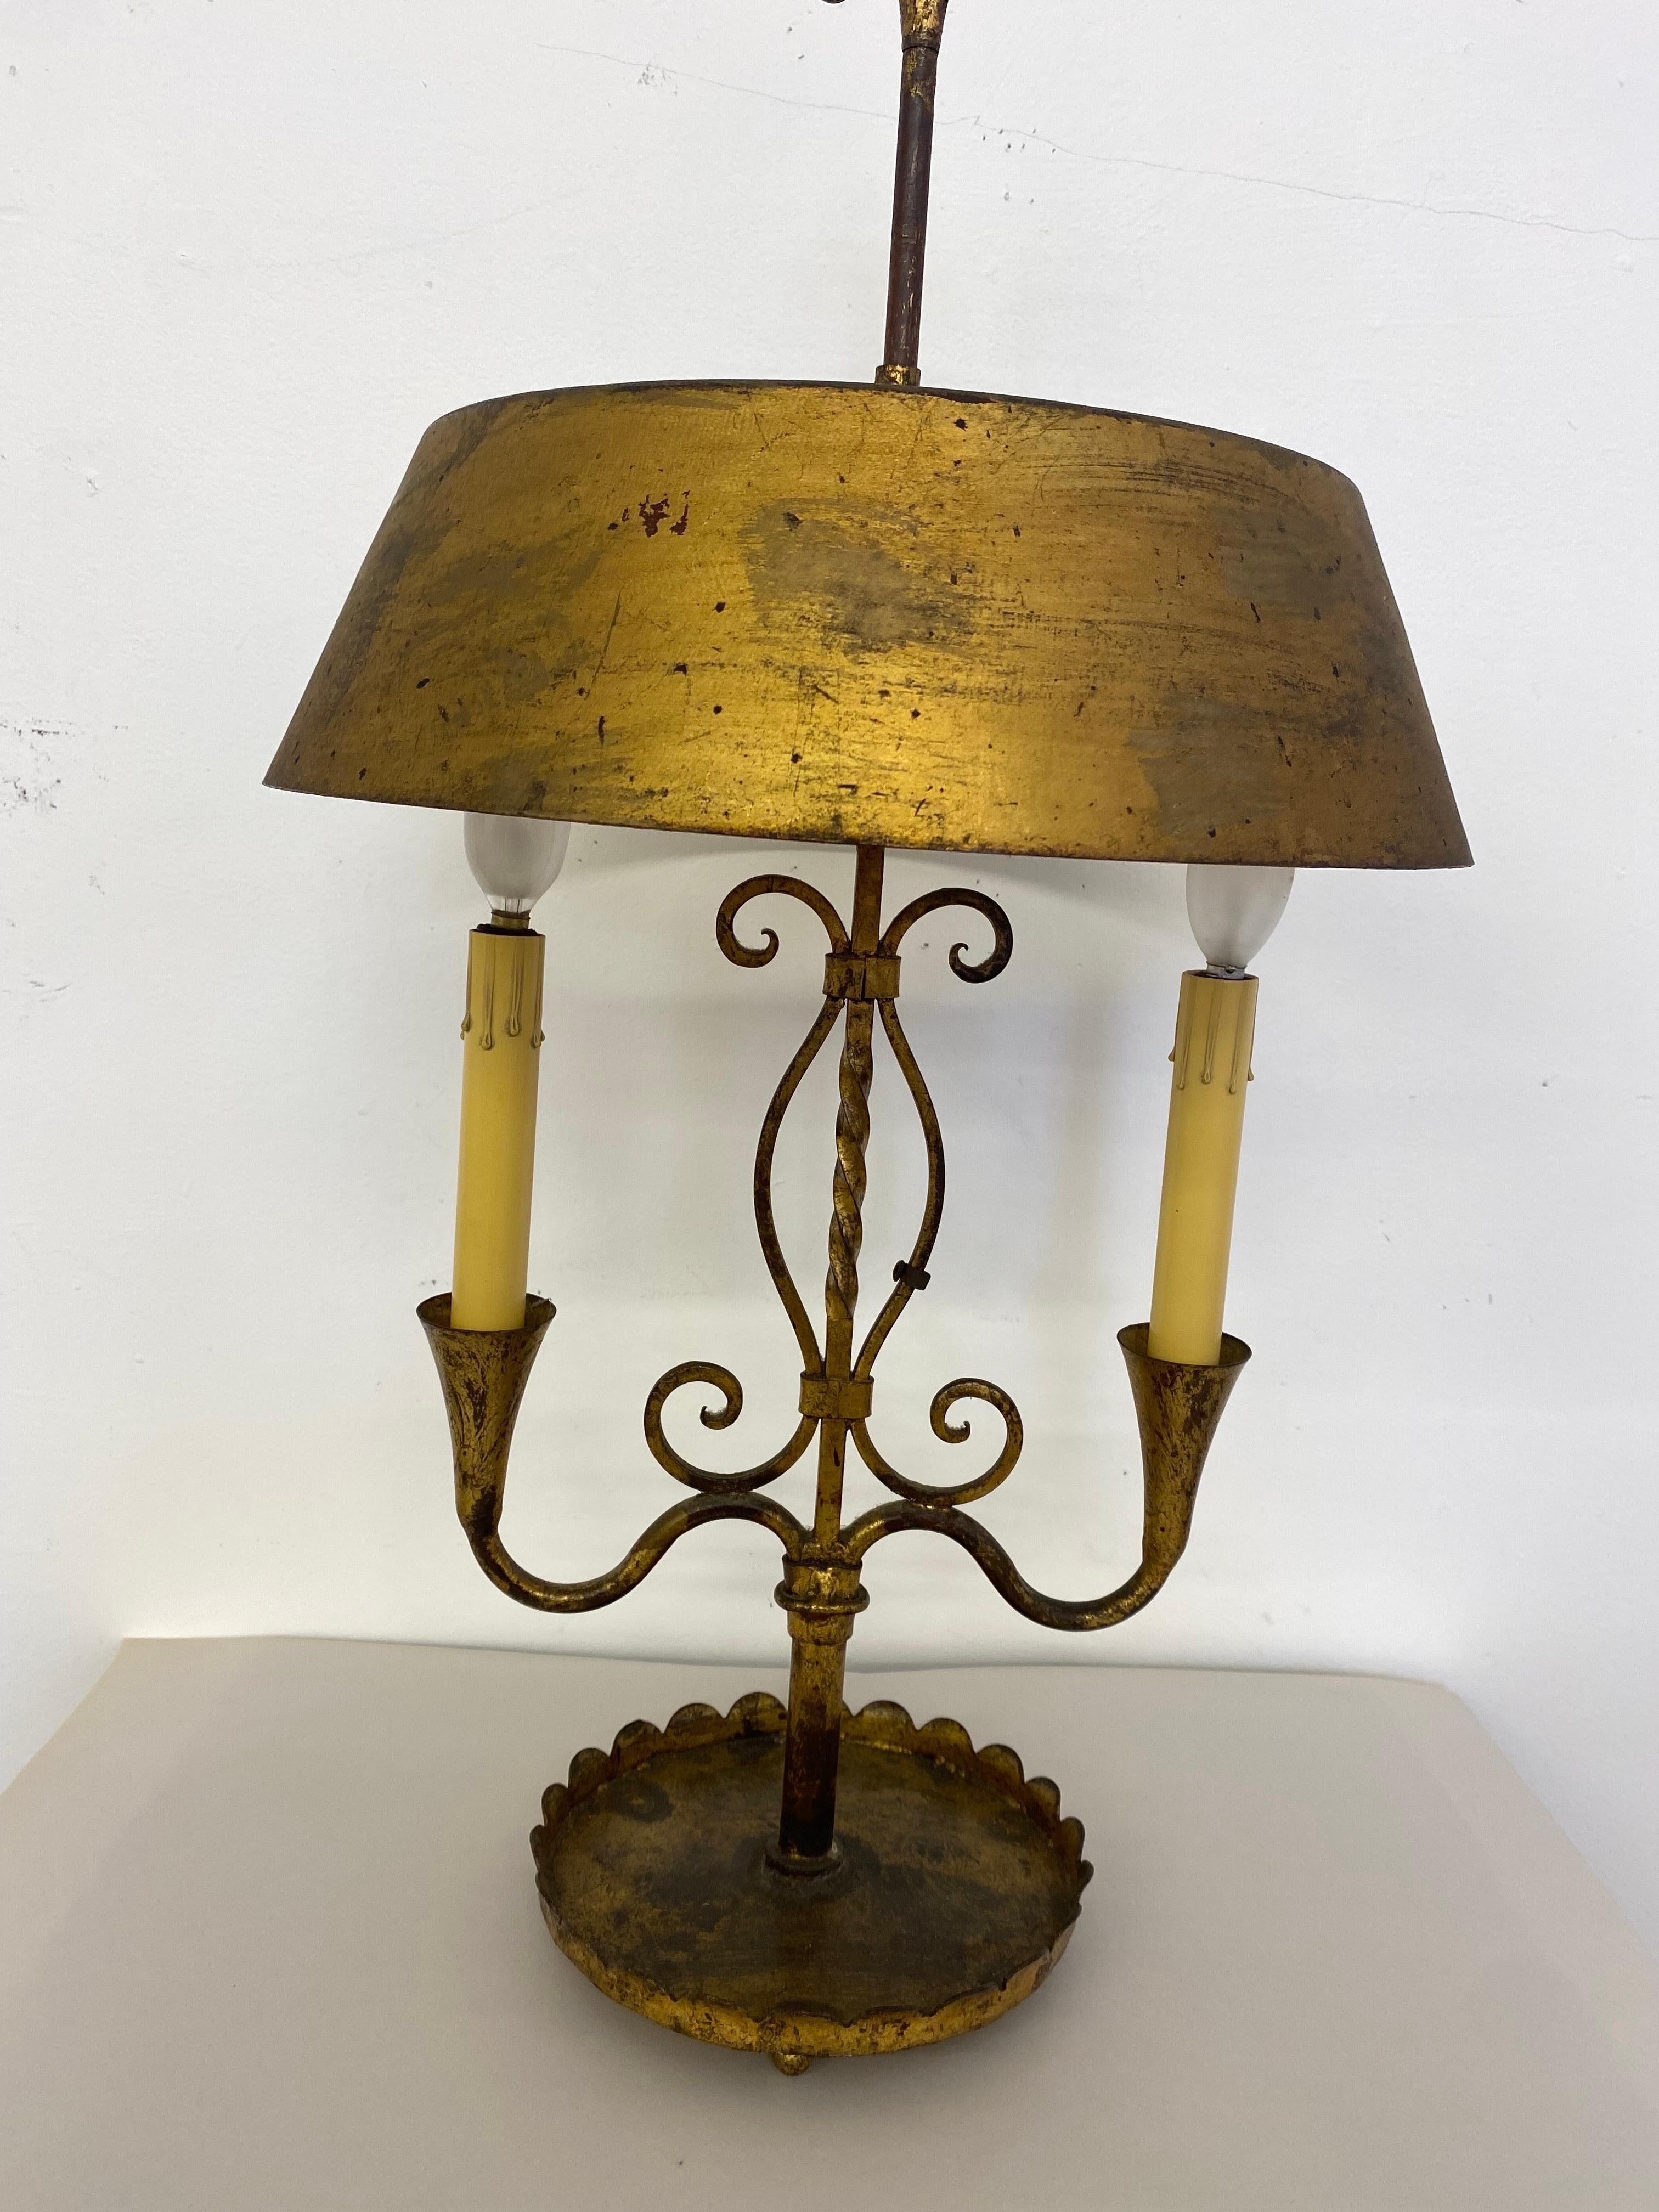 Gilt metal tble lamp with an adjustable shade. Nicely made with Italy tag still attached. Gilt shows nice patina and wear.